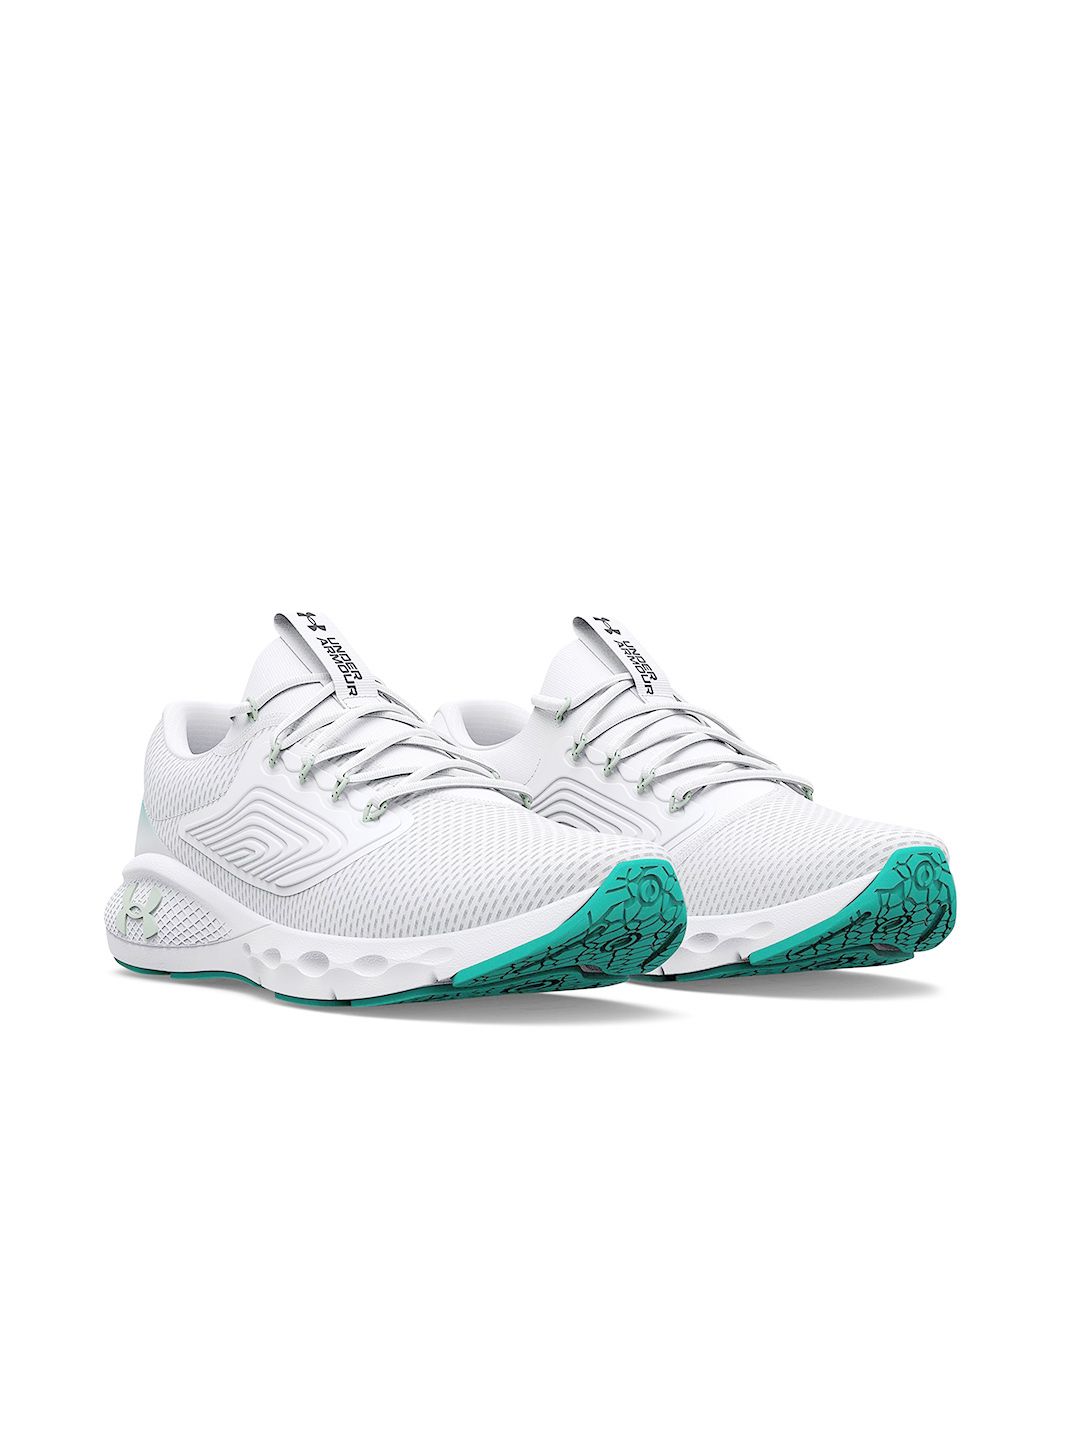 UNDER ARMOUR Women White Woven Design Charged Vantage 2 Running Shoes Price in India